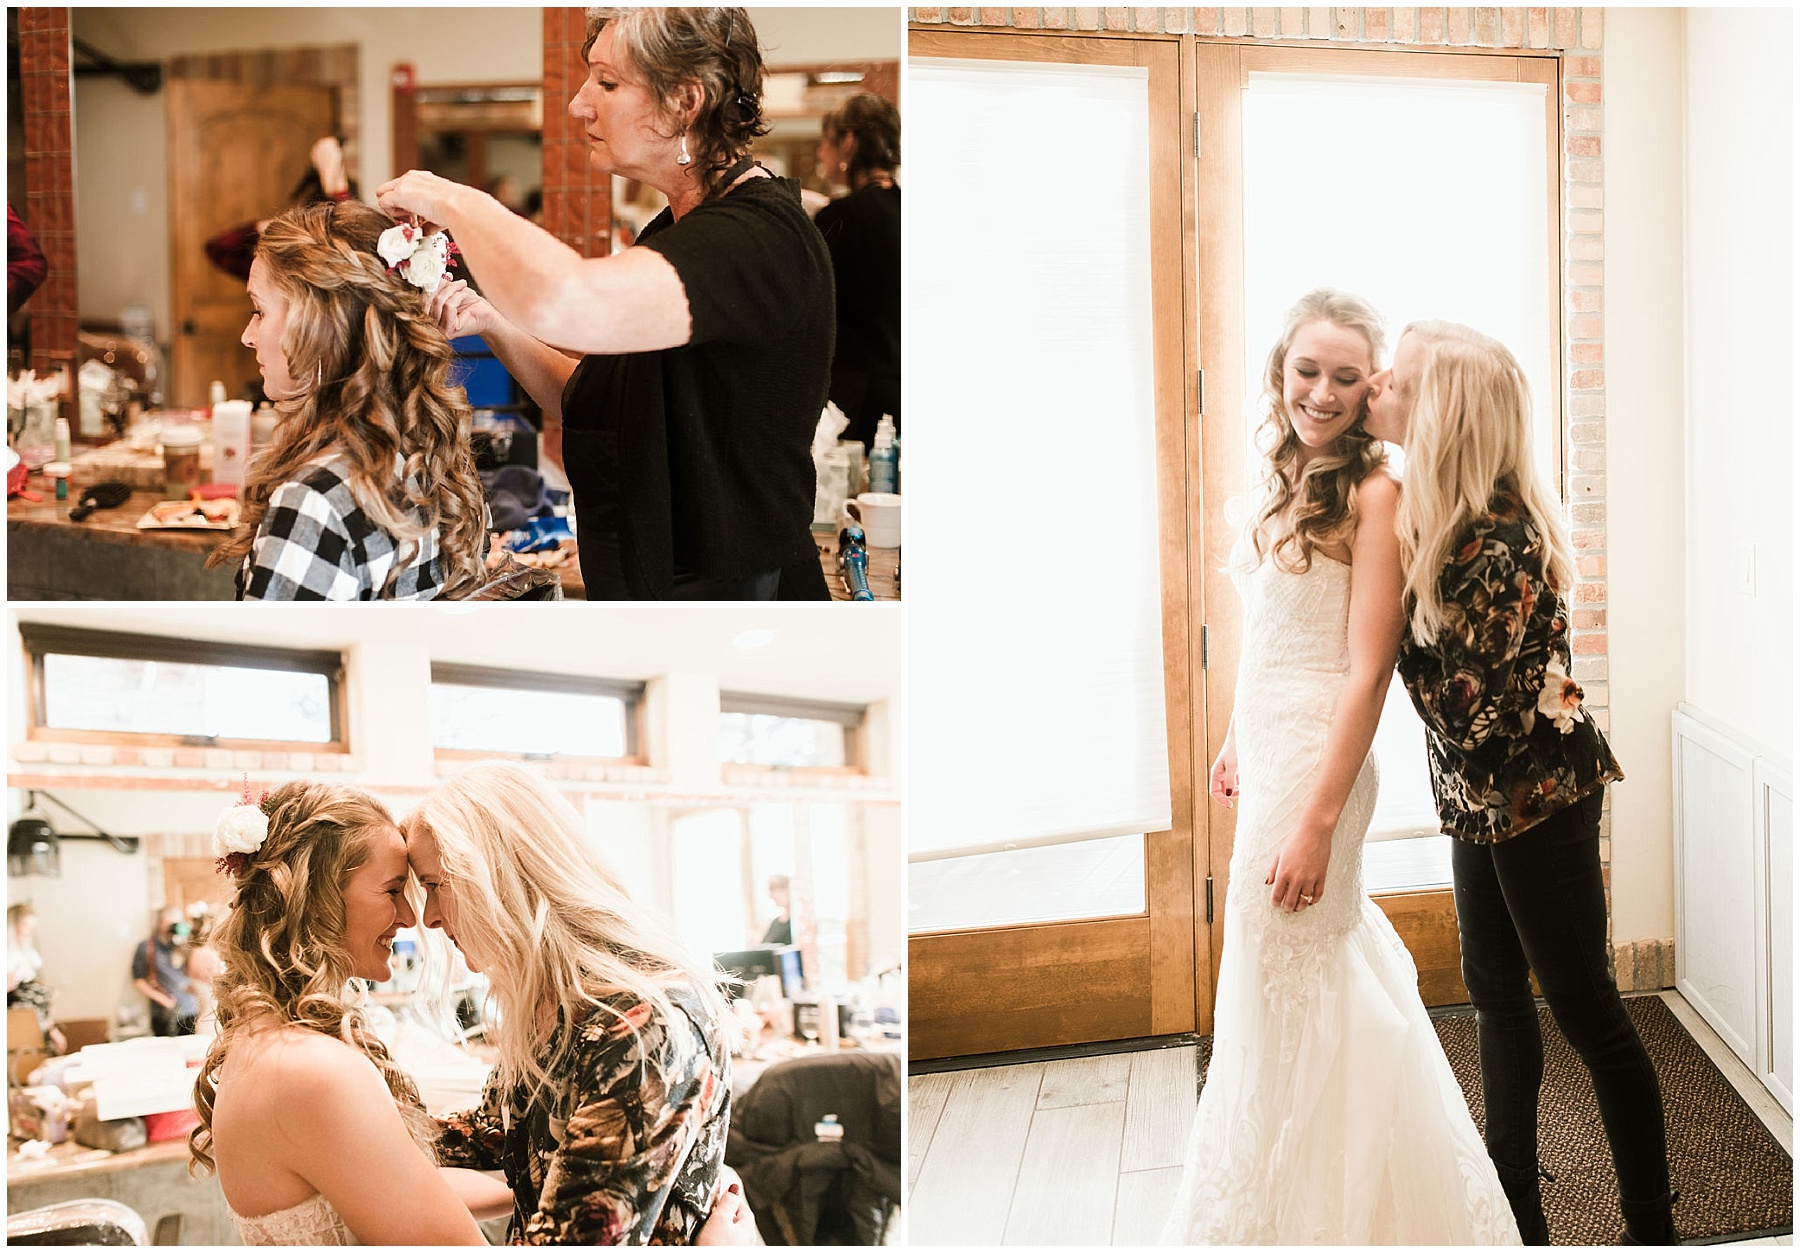 Katesalleyphotography-32_Haley and Dan get married in Estes Park.jpg